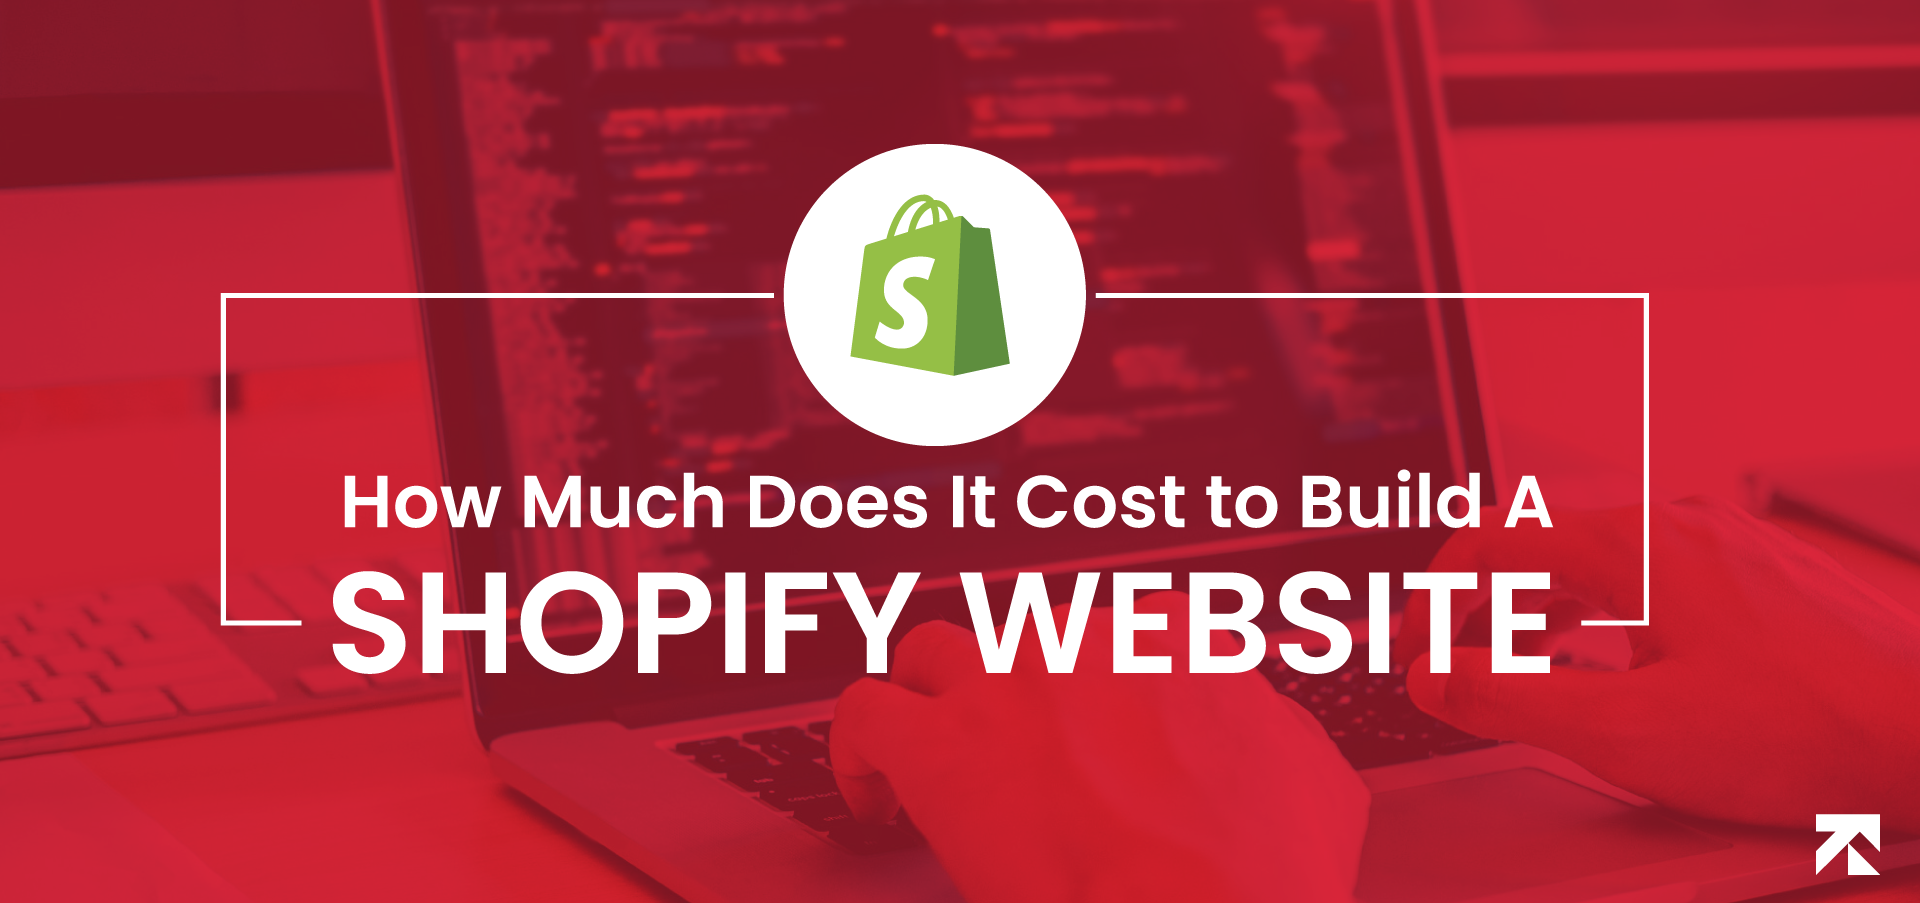 You are currently viewing The cost of building a Shopify website varies depending on the scope of the work and the features required. Here are some key points from the search results: